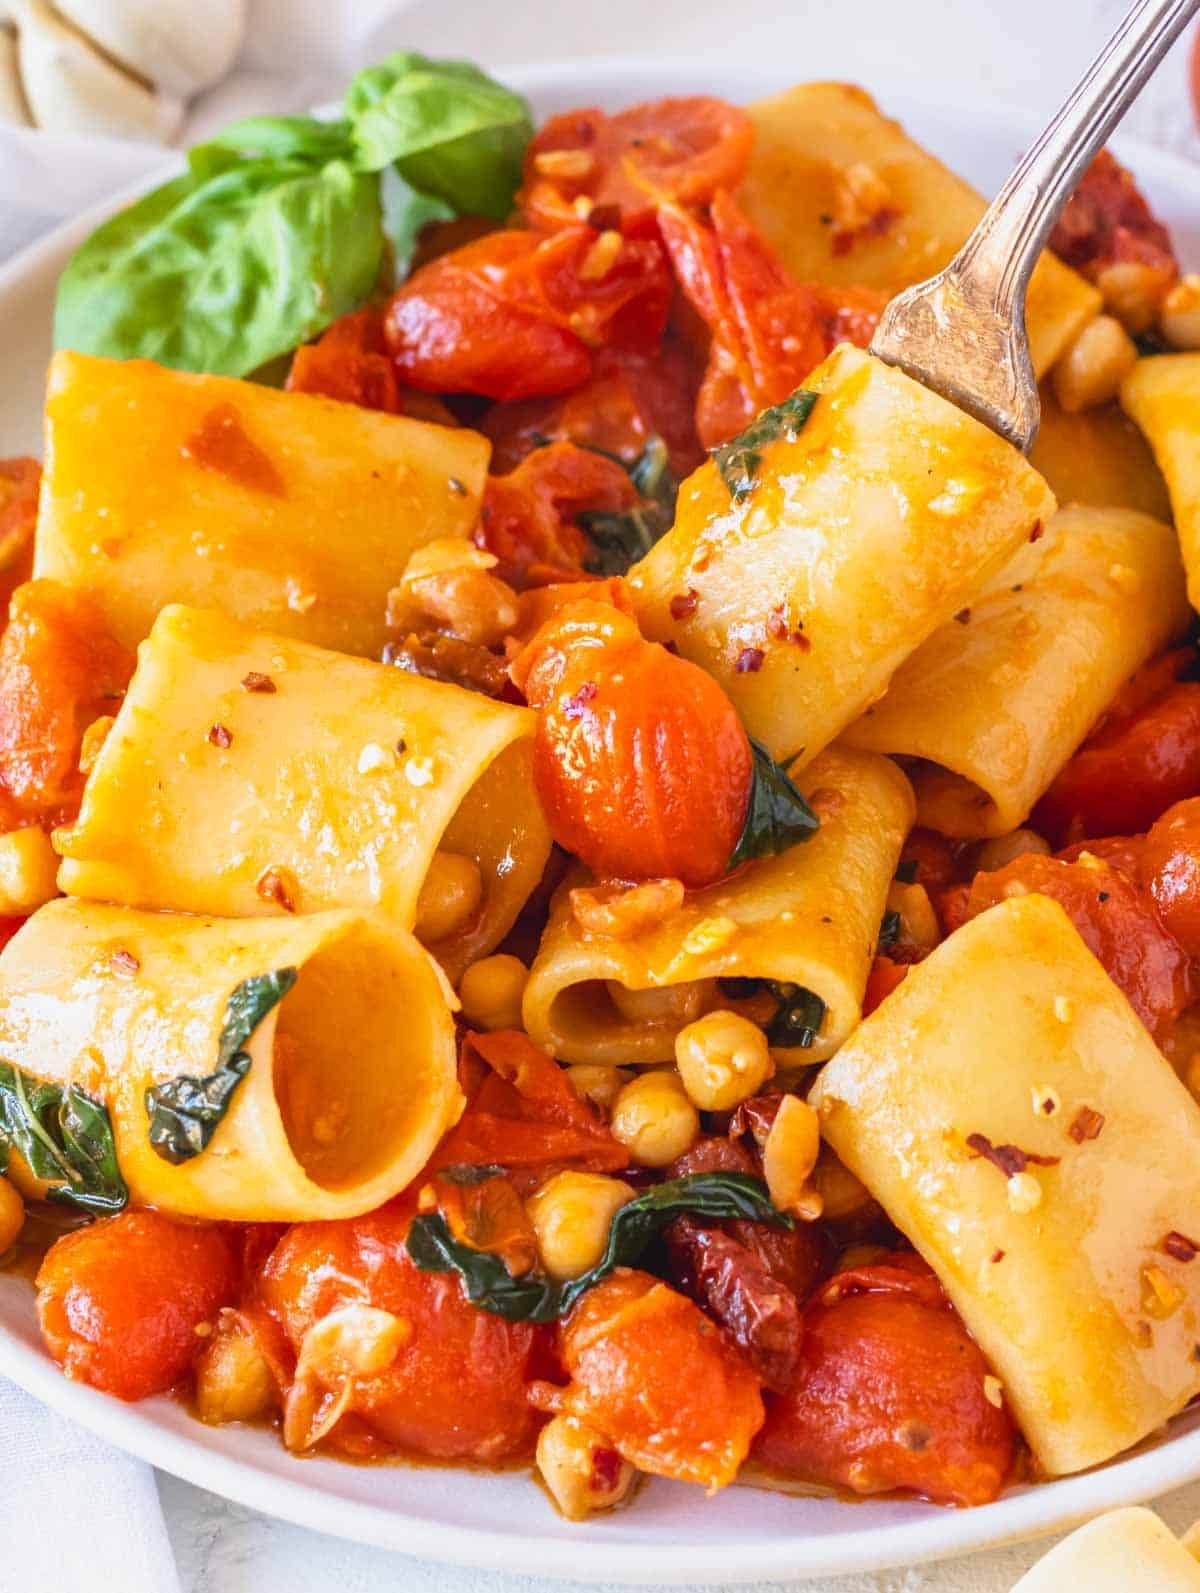 paccheri pasta with cherry tomatoes on a white plate